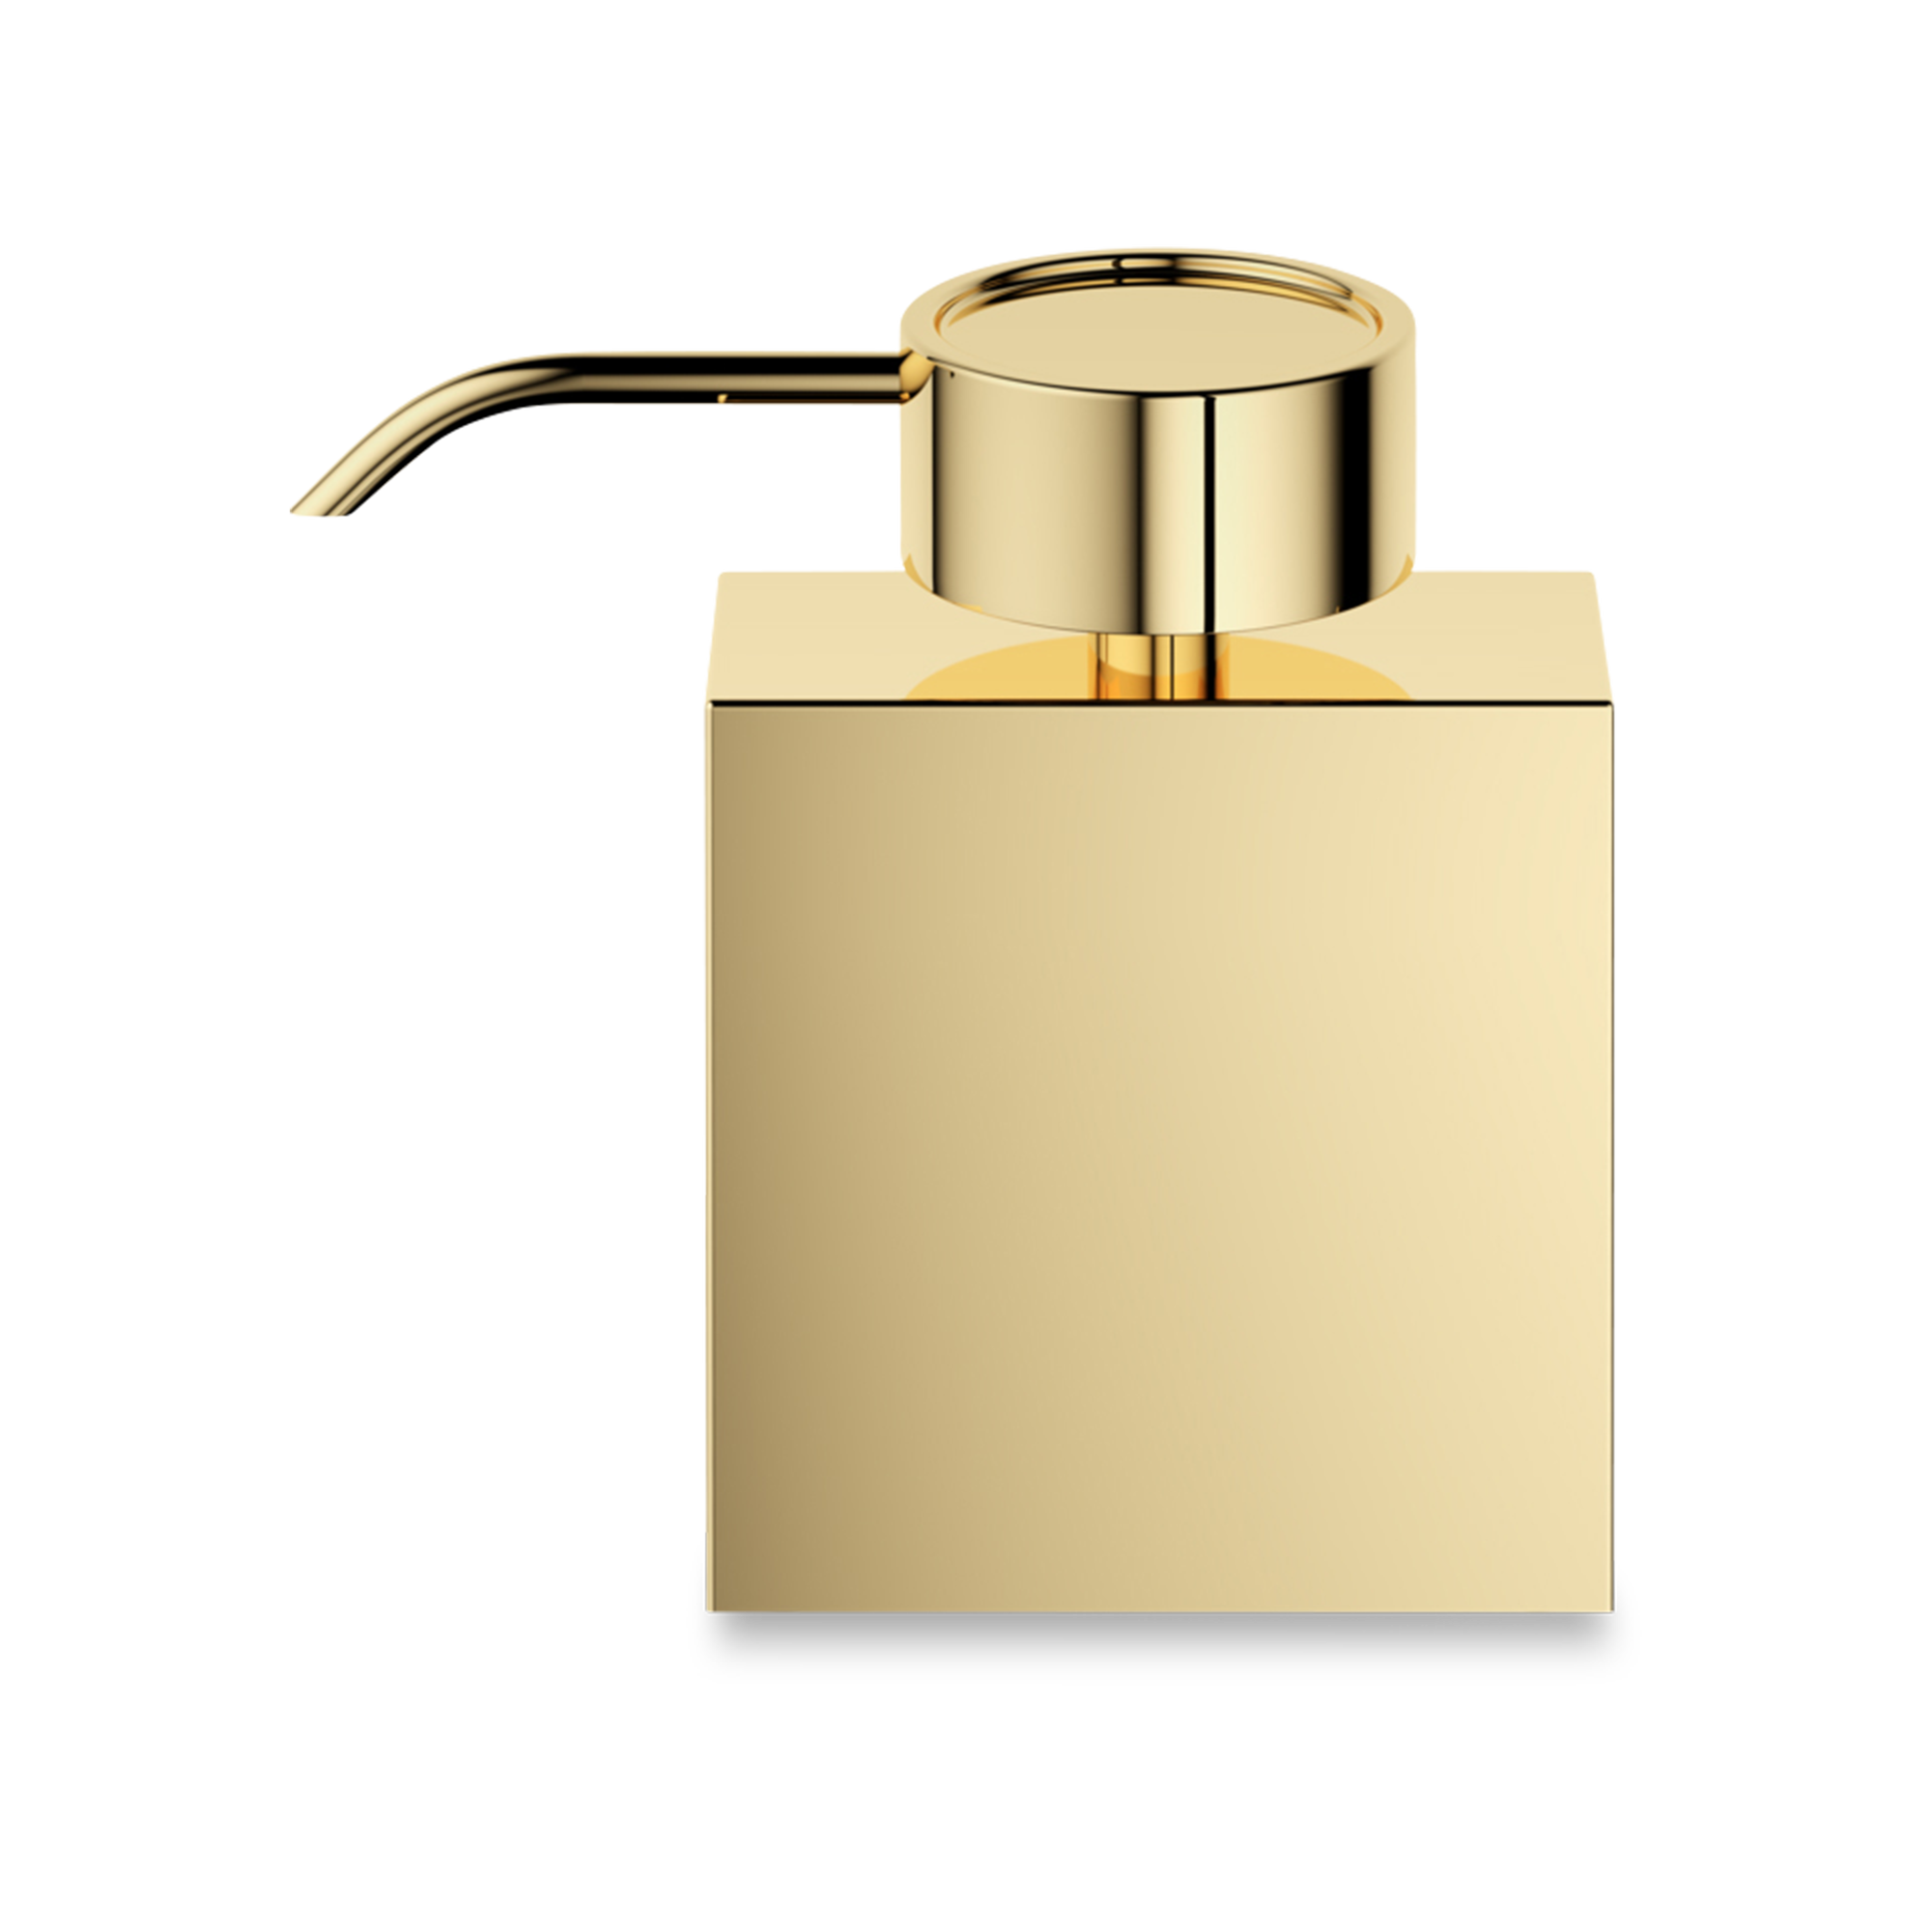 A modern and stylish soap dispenser featured in an elegant gold finish.